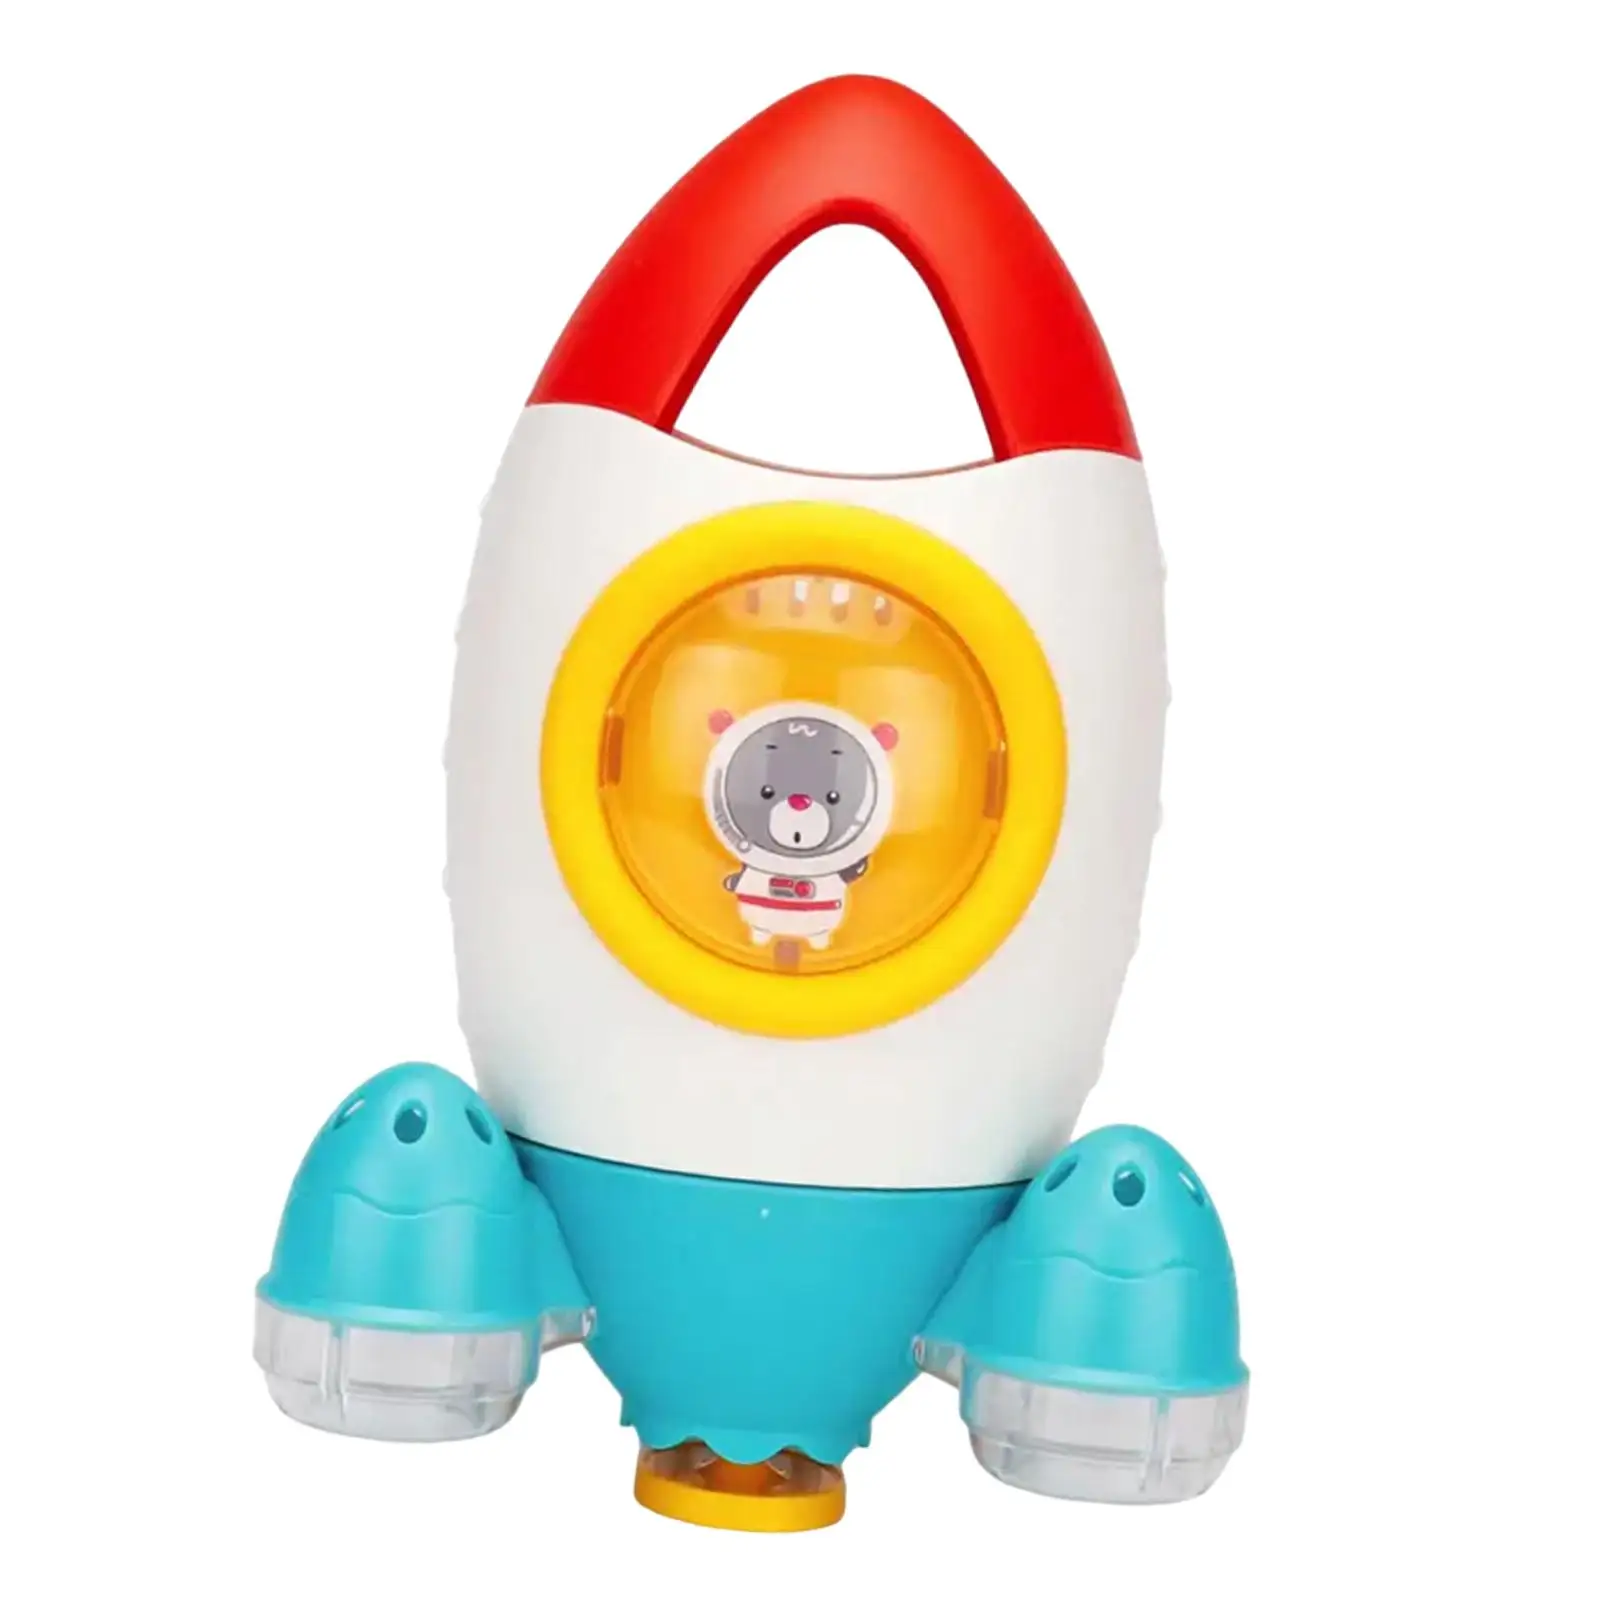 Water Spray Rocket Bath Baby Bathtub Toys for Toddlers Ages 1-5 Infants